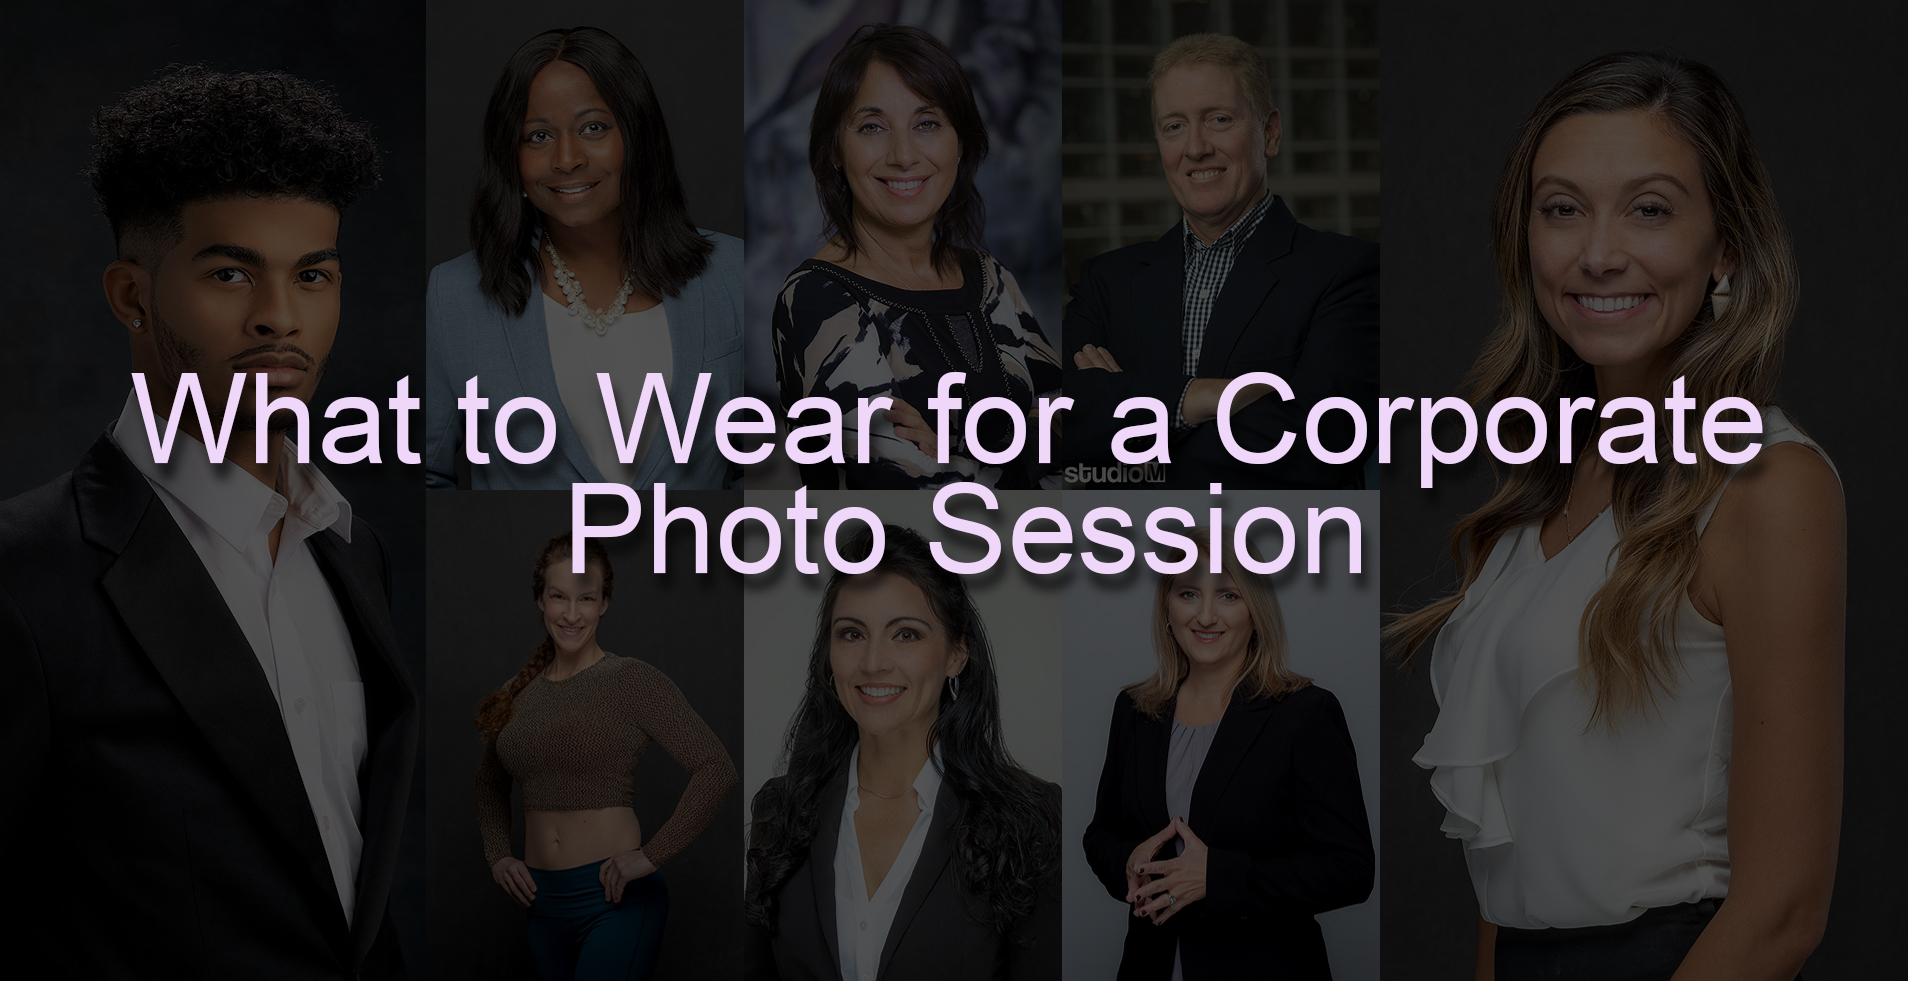 What to Wear for a Corporate Photo Session